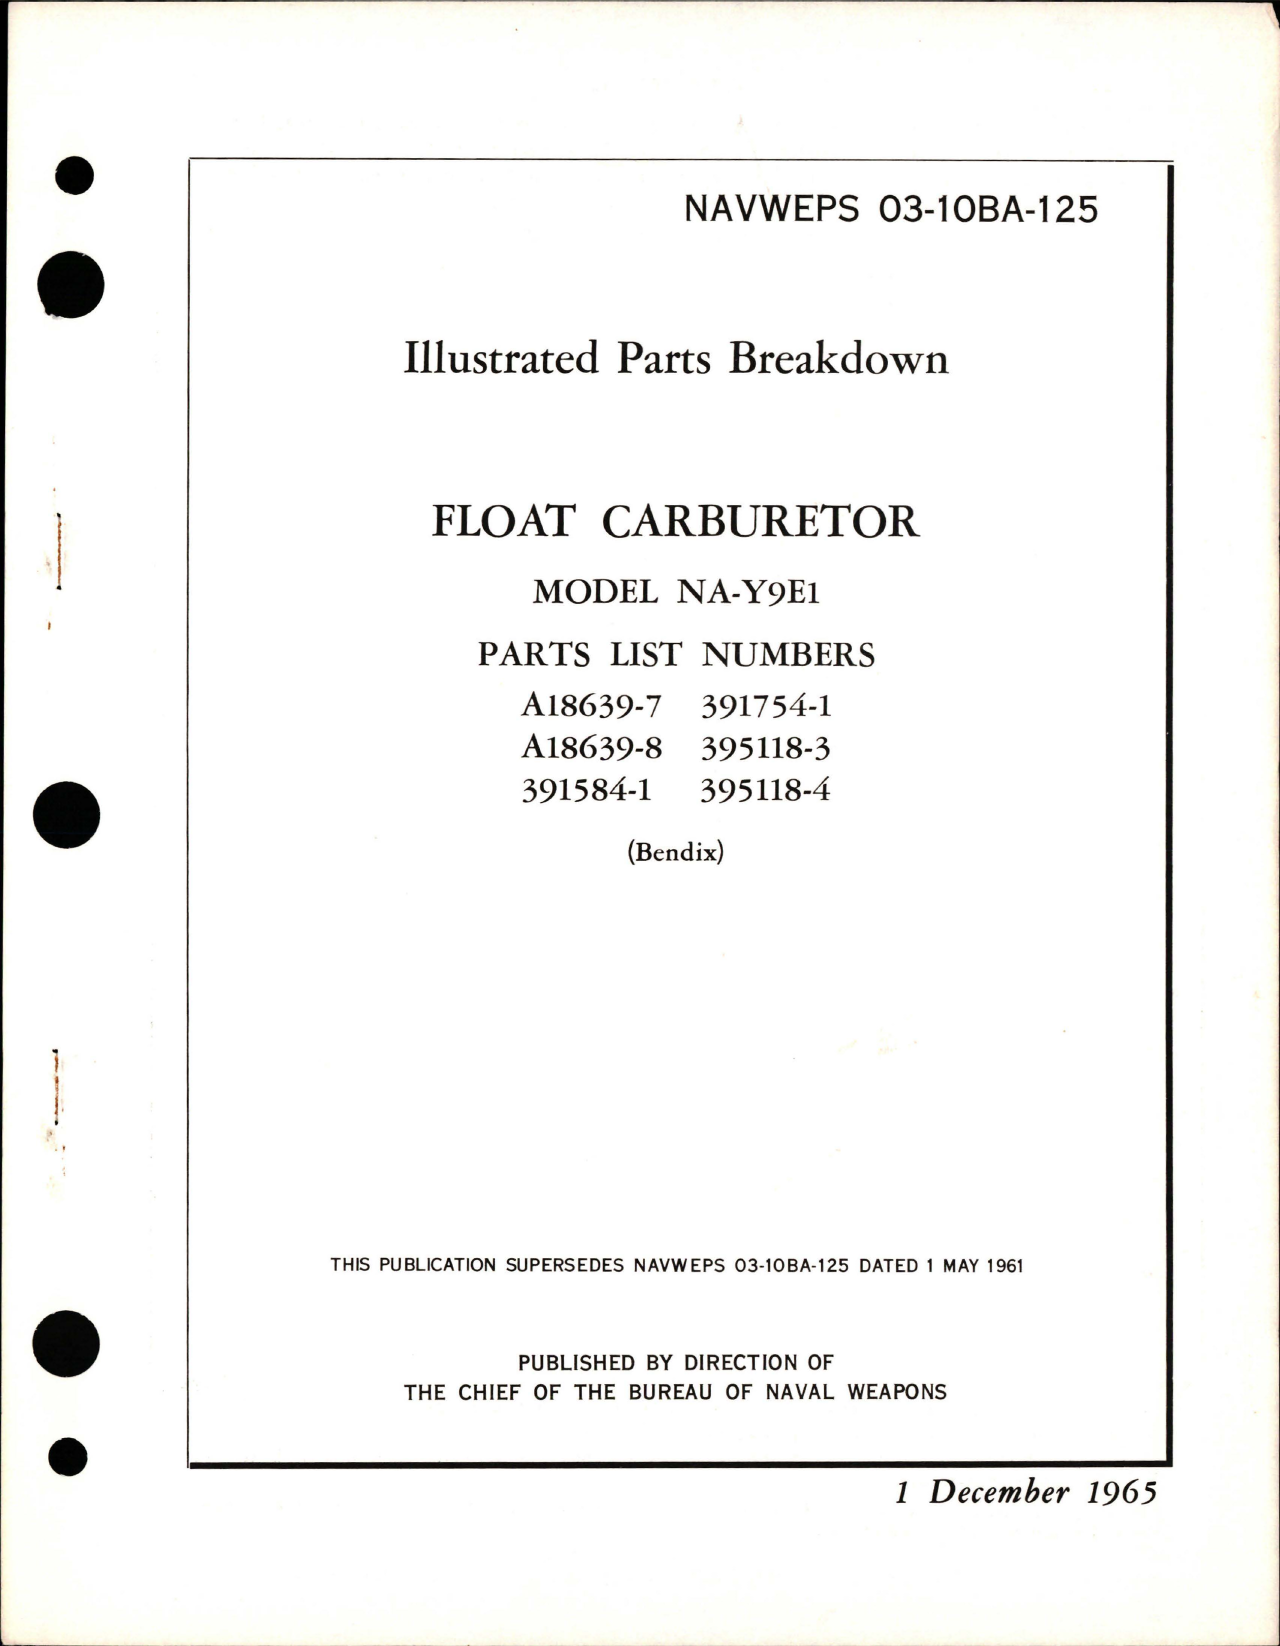 Sample page 1 from AirCorps Library document: Illustrated Parts Breakdown for Float Carburetor - Model NA-Y9E1